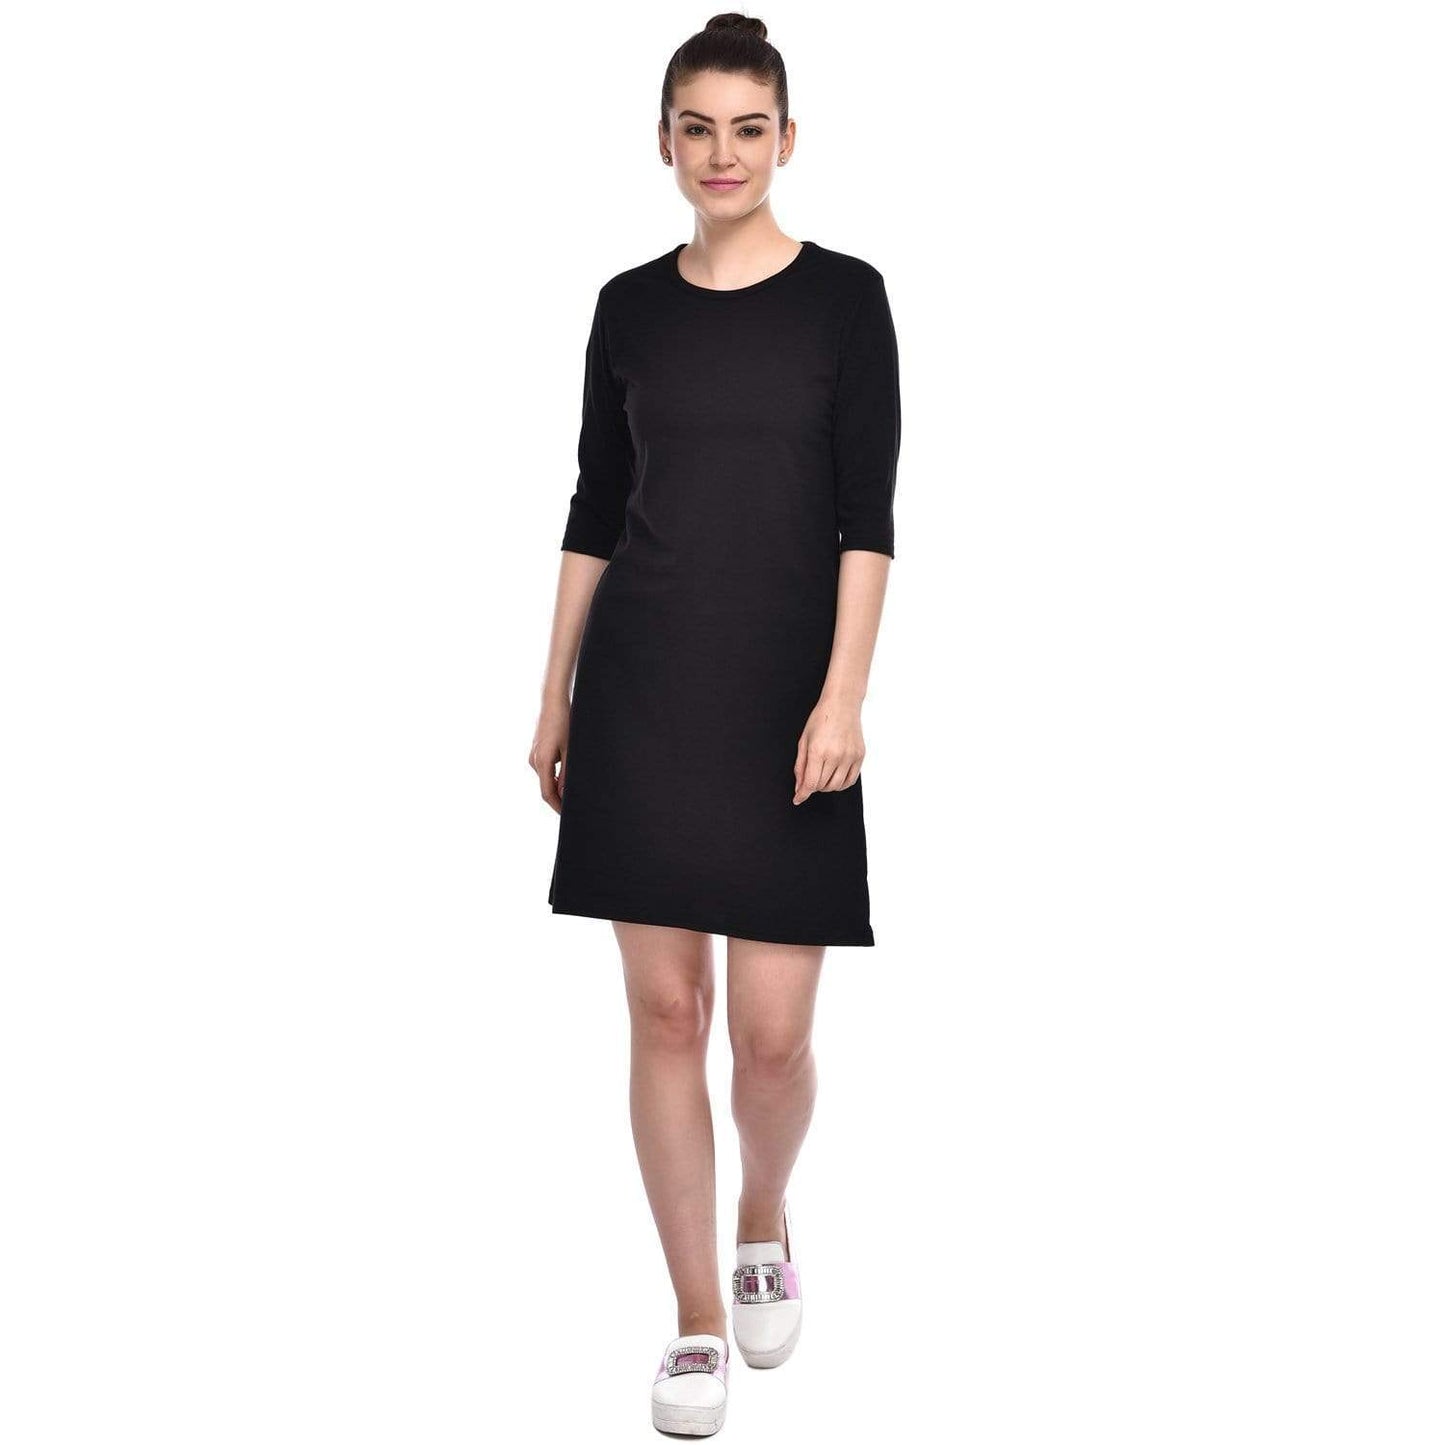 Bazarville Customer XS / 100% Cotton / Charcoal Black Bazarville Charcoal Black T-shirt Dress